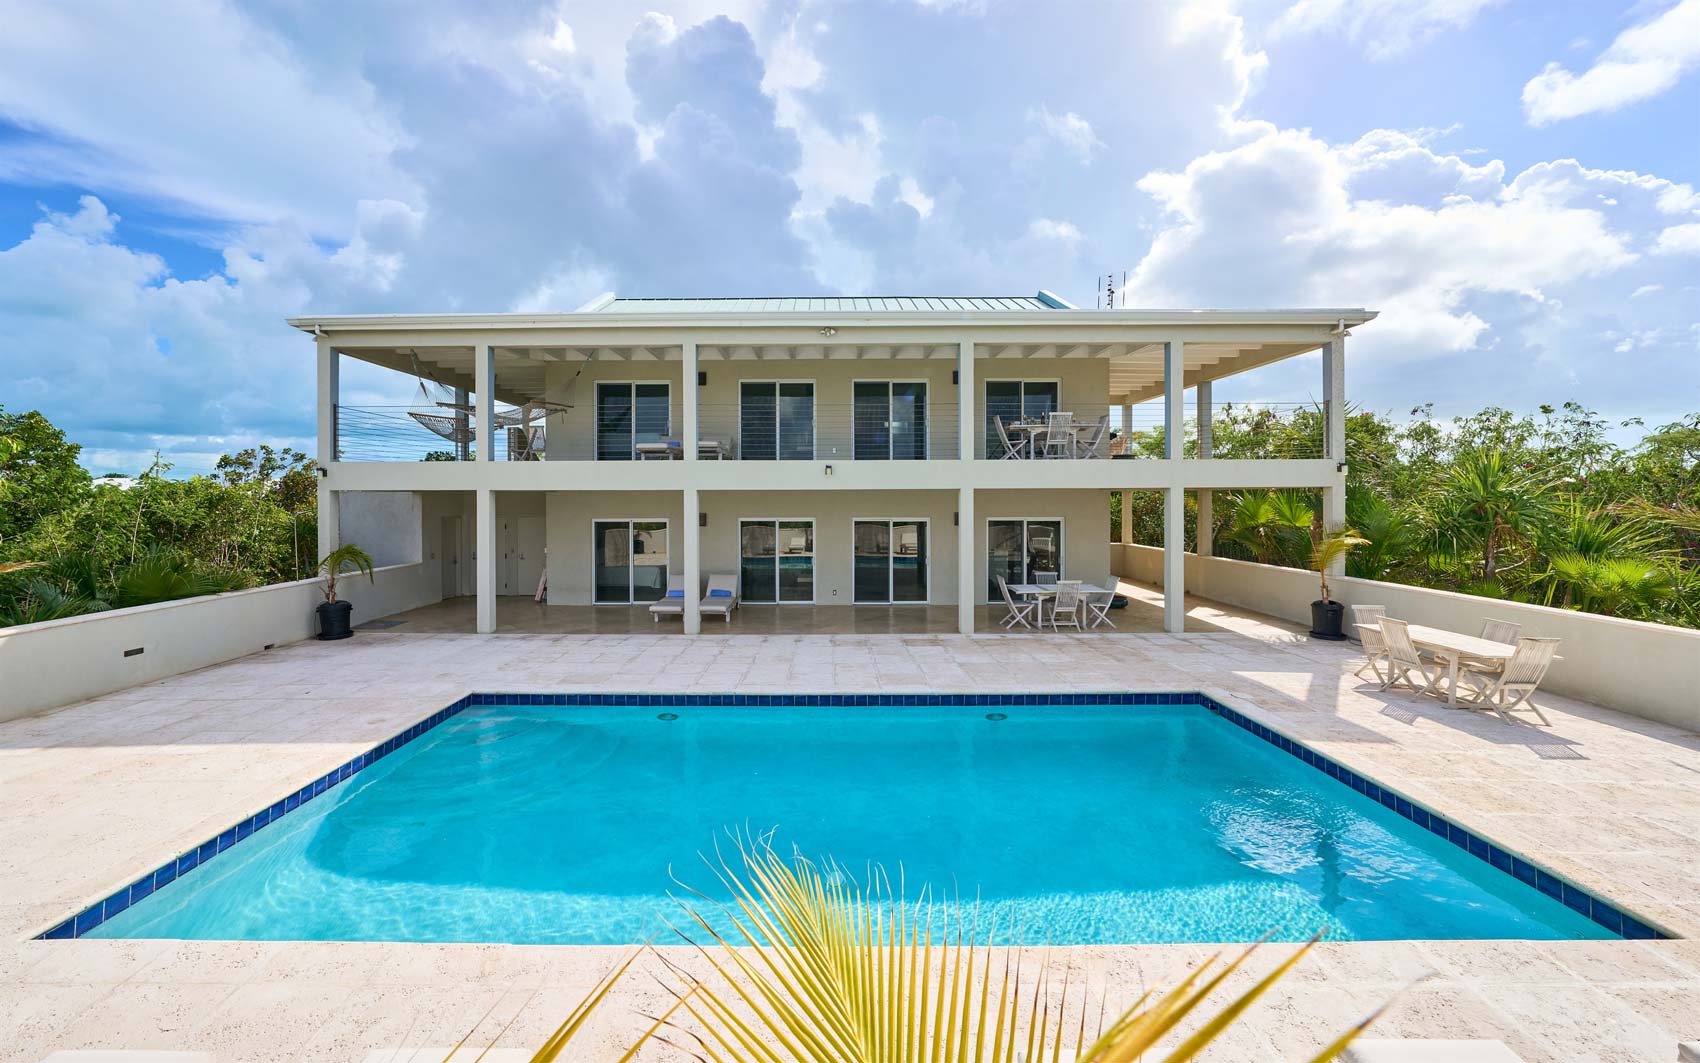 Vista House Vacation Home in Turks and Caicos, Blue Heron Vacations